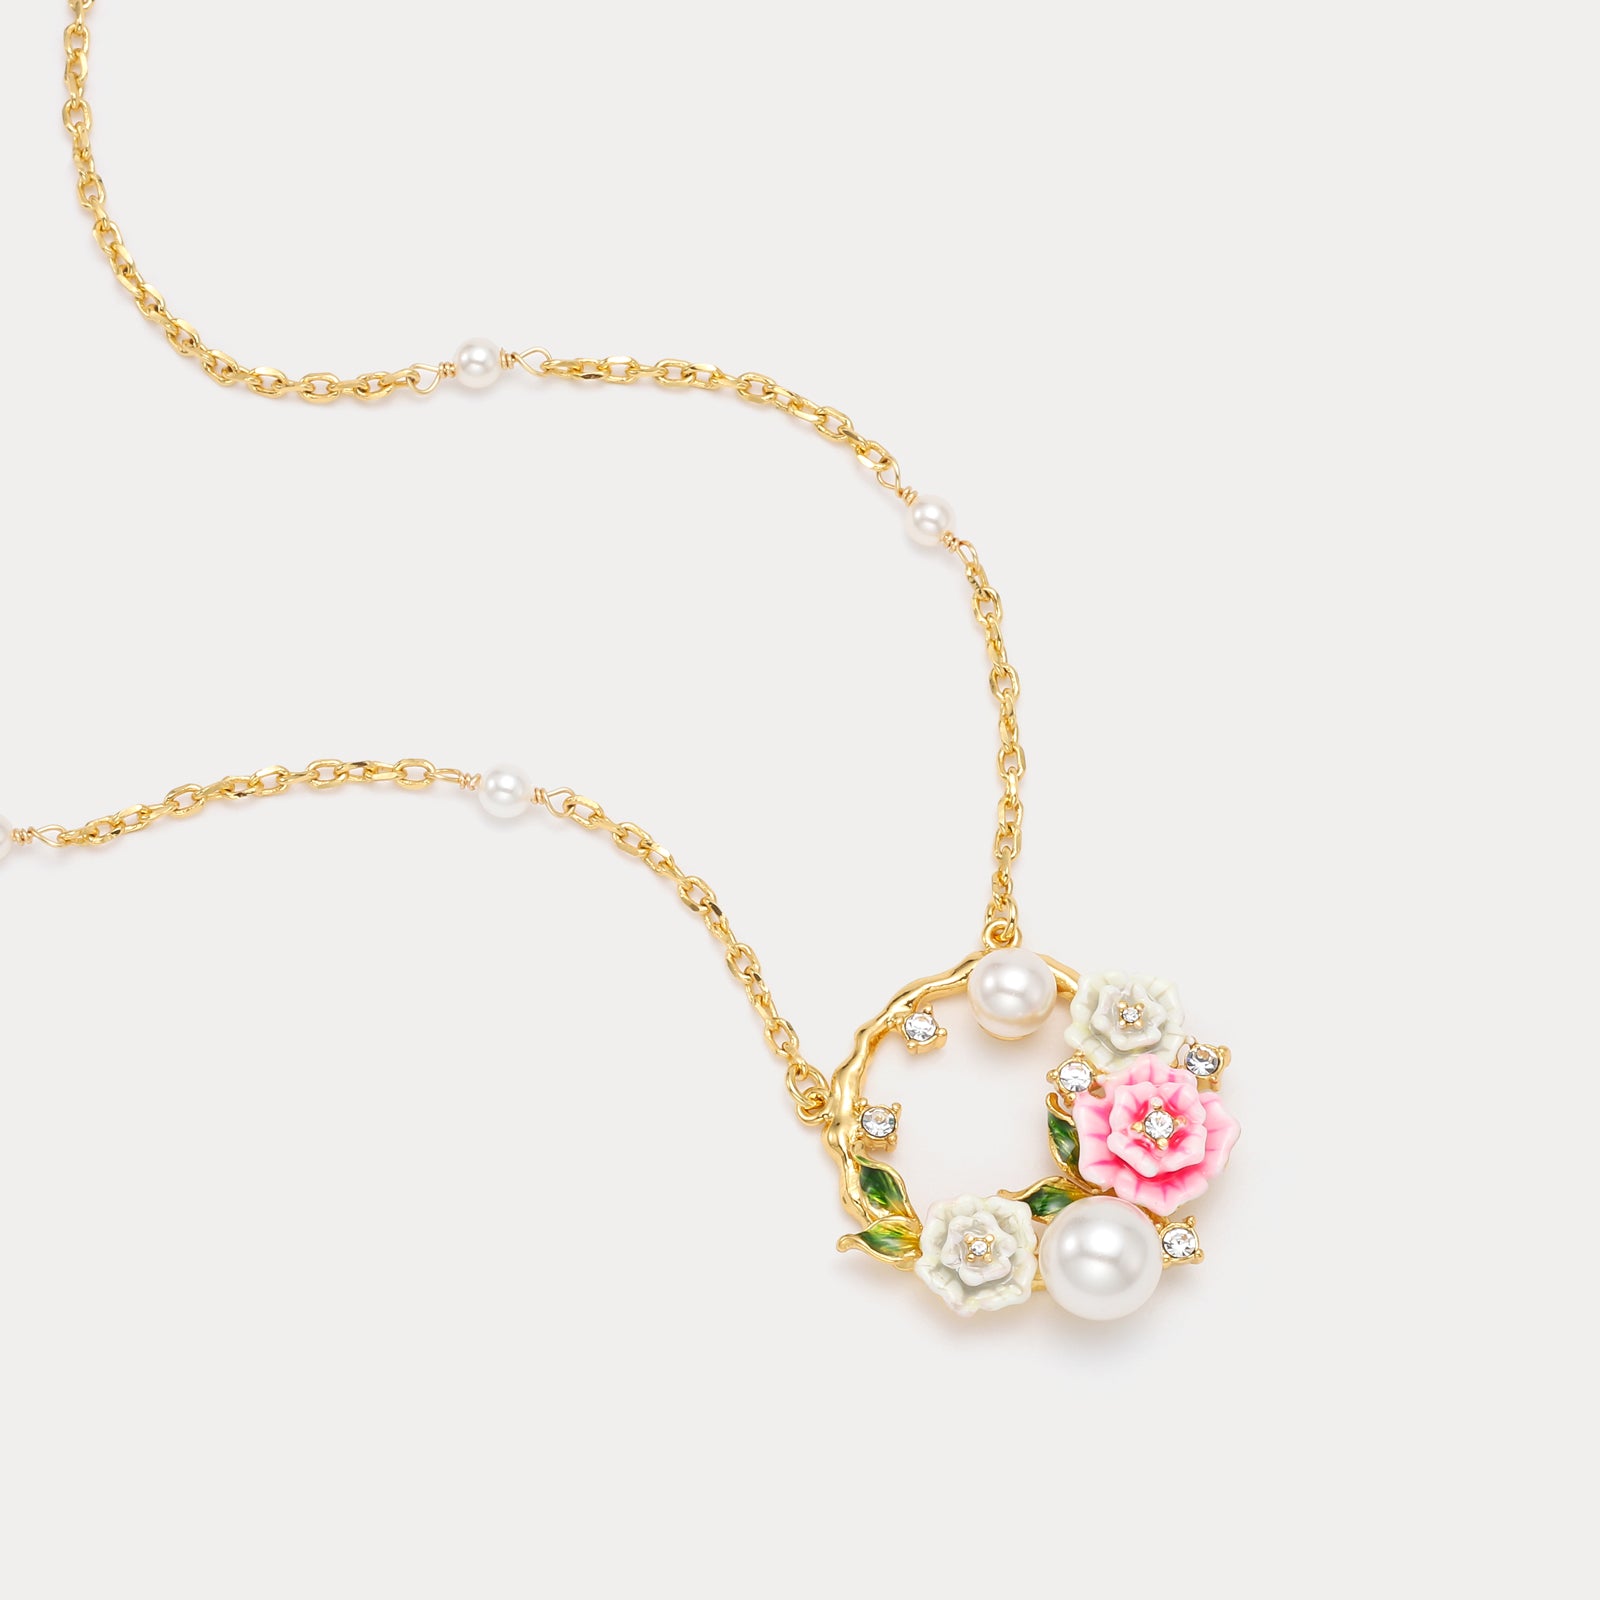 Wild Rose Garland Necklace for Women